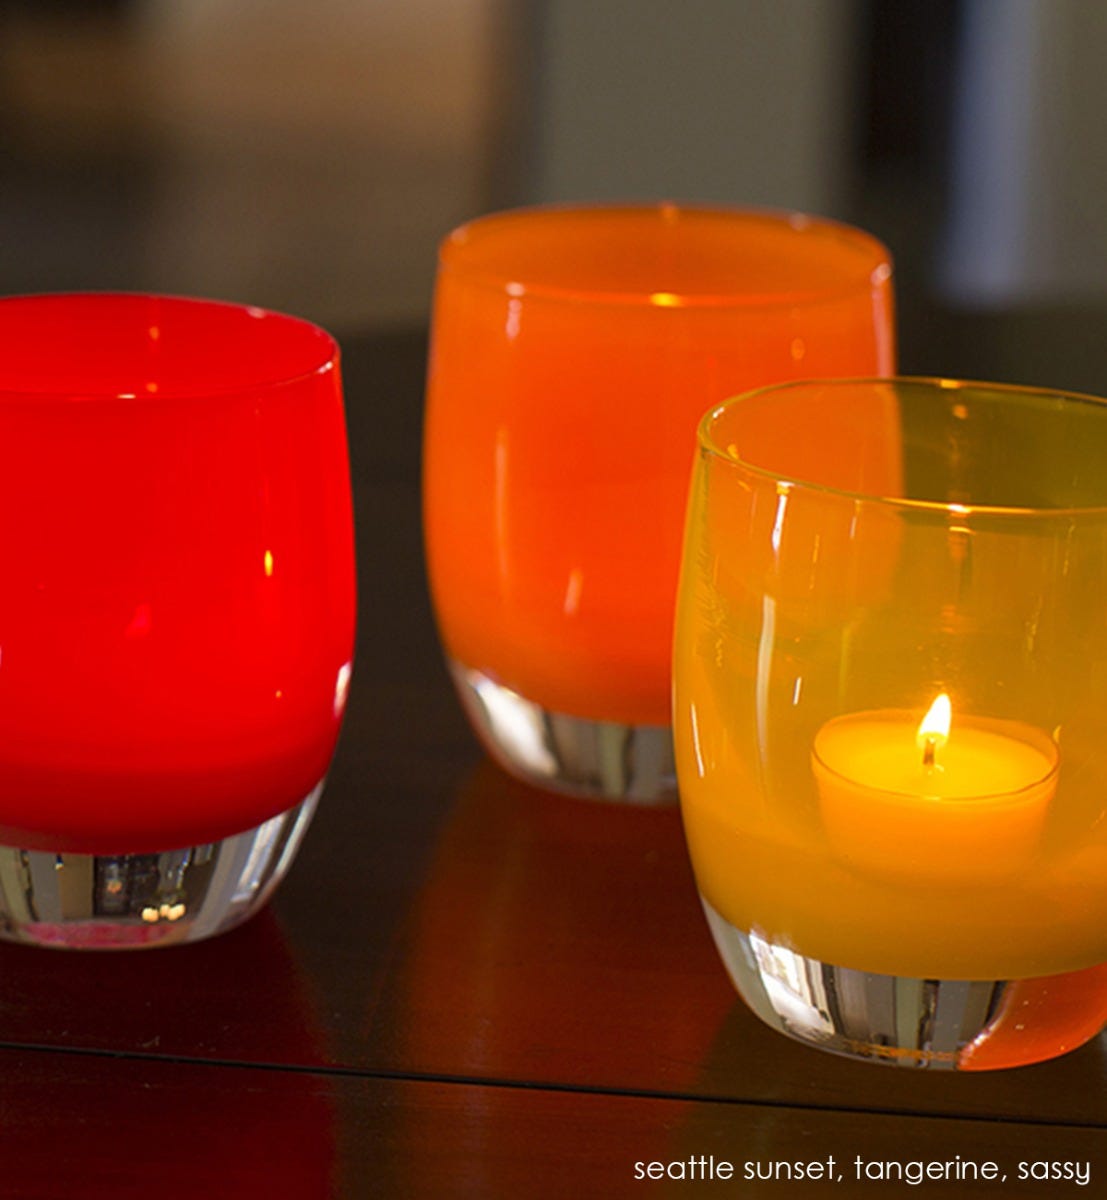 tangerine orange hand-blown glass votive candle holder. Paired with seattle sunset and sassy.